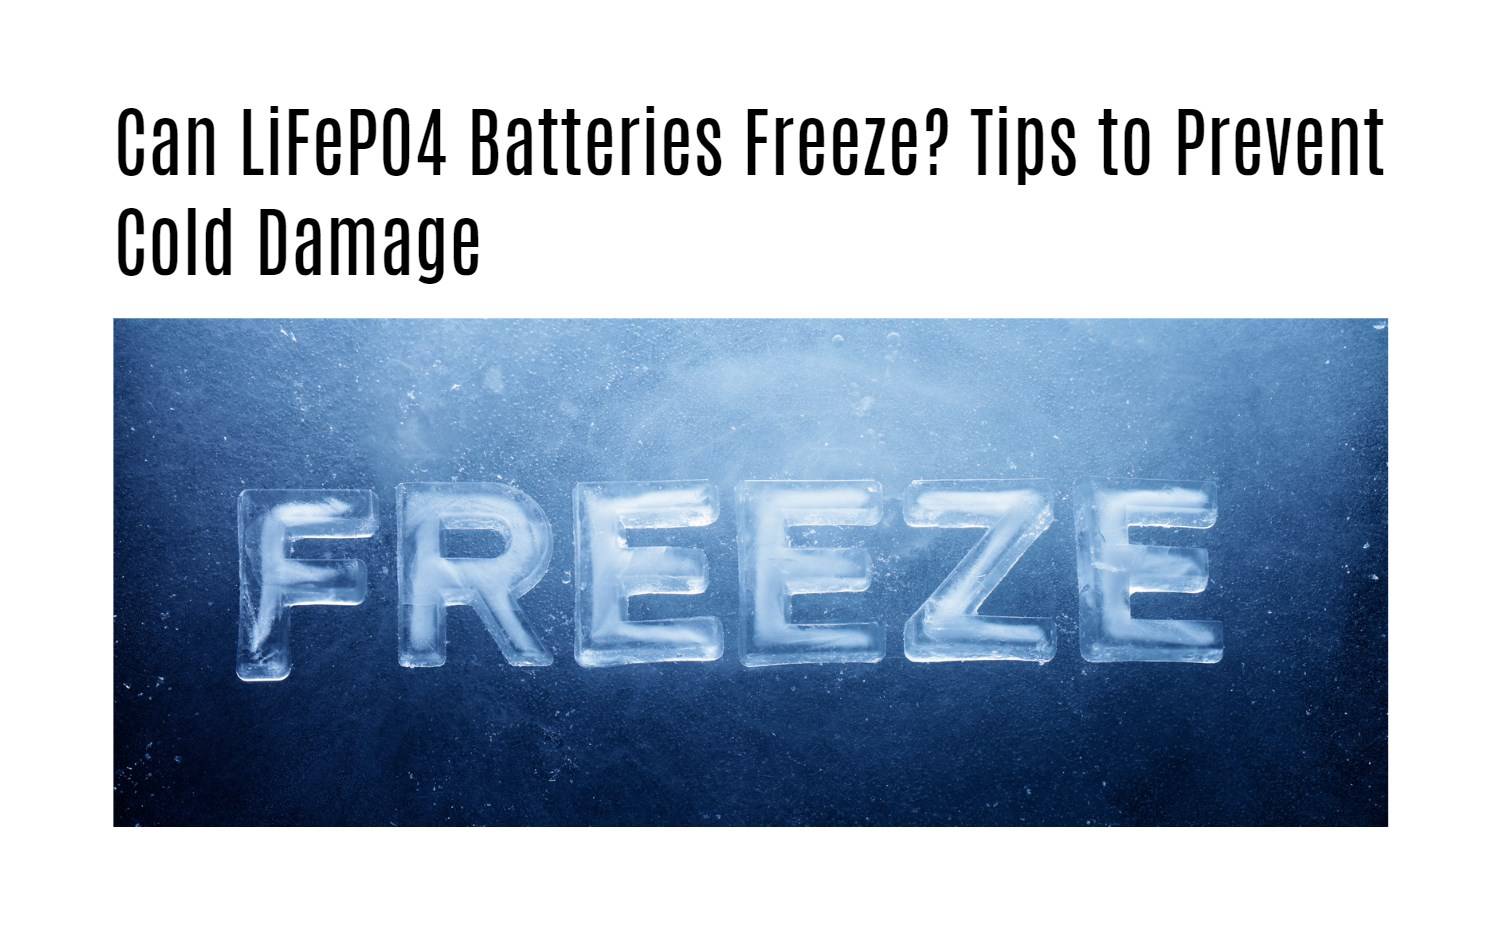 Can LiFePO4 Batteries Freeze? Tips to Prevent Cold Damage